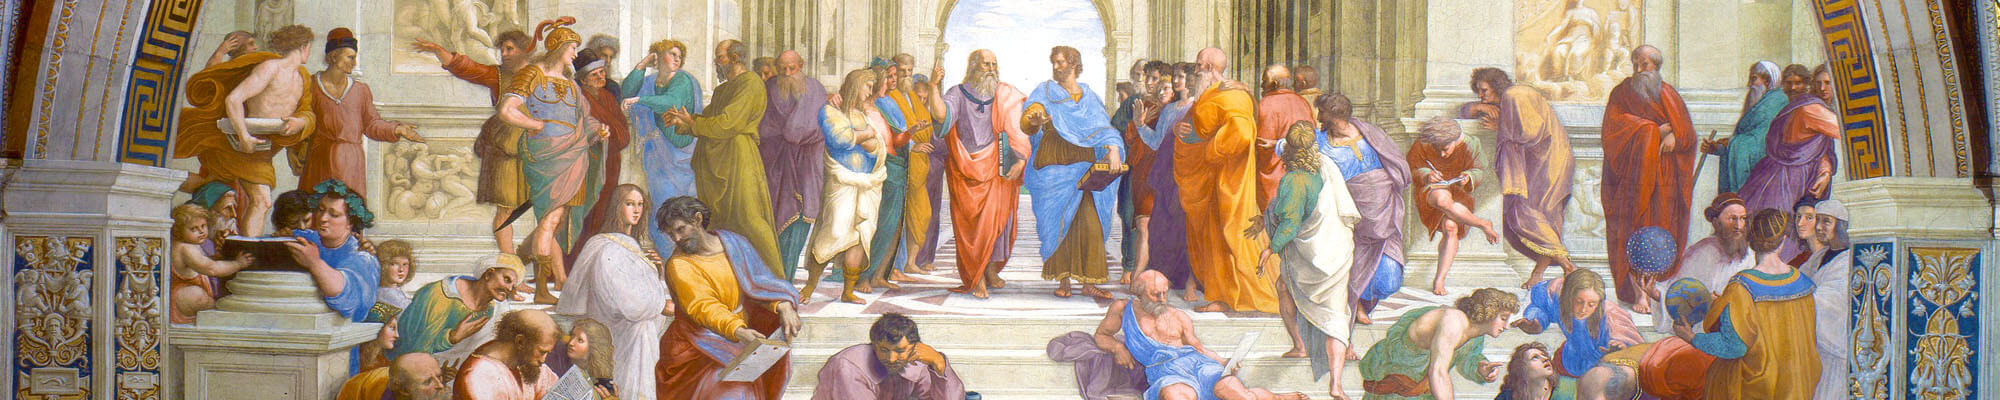 Raphael's painting of Philosophers: The School of Athens